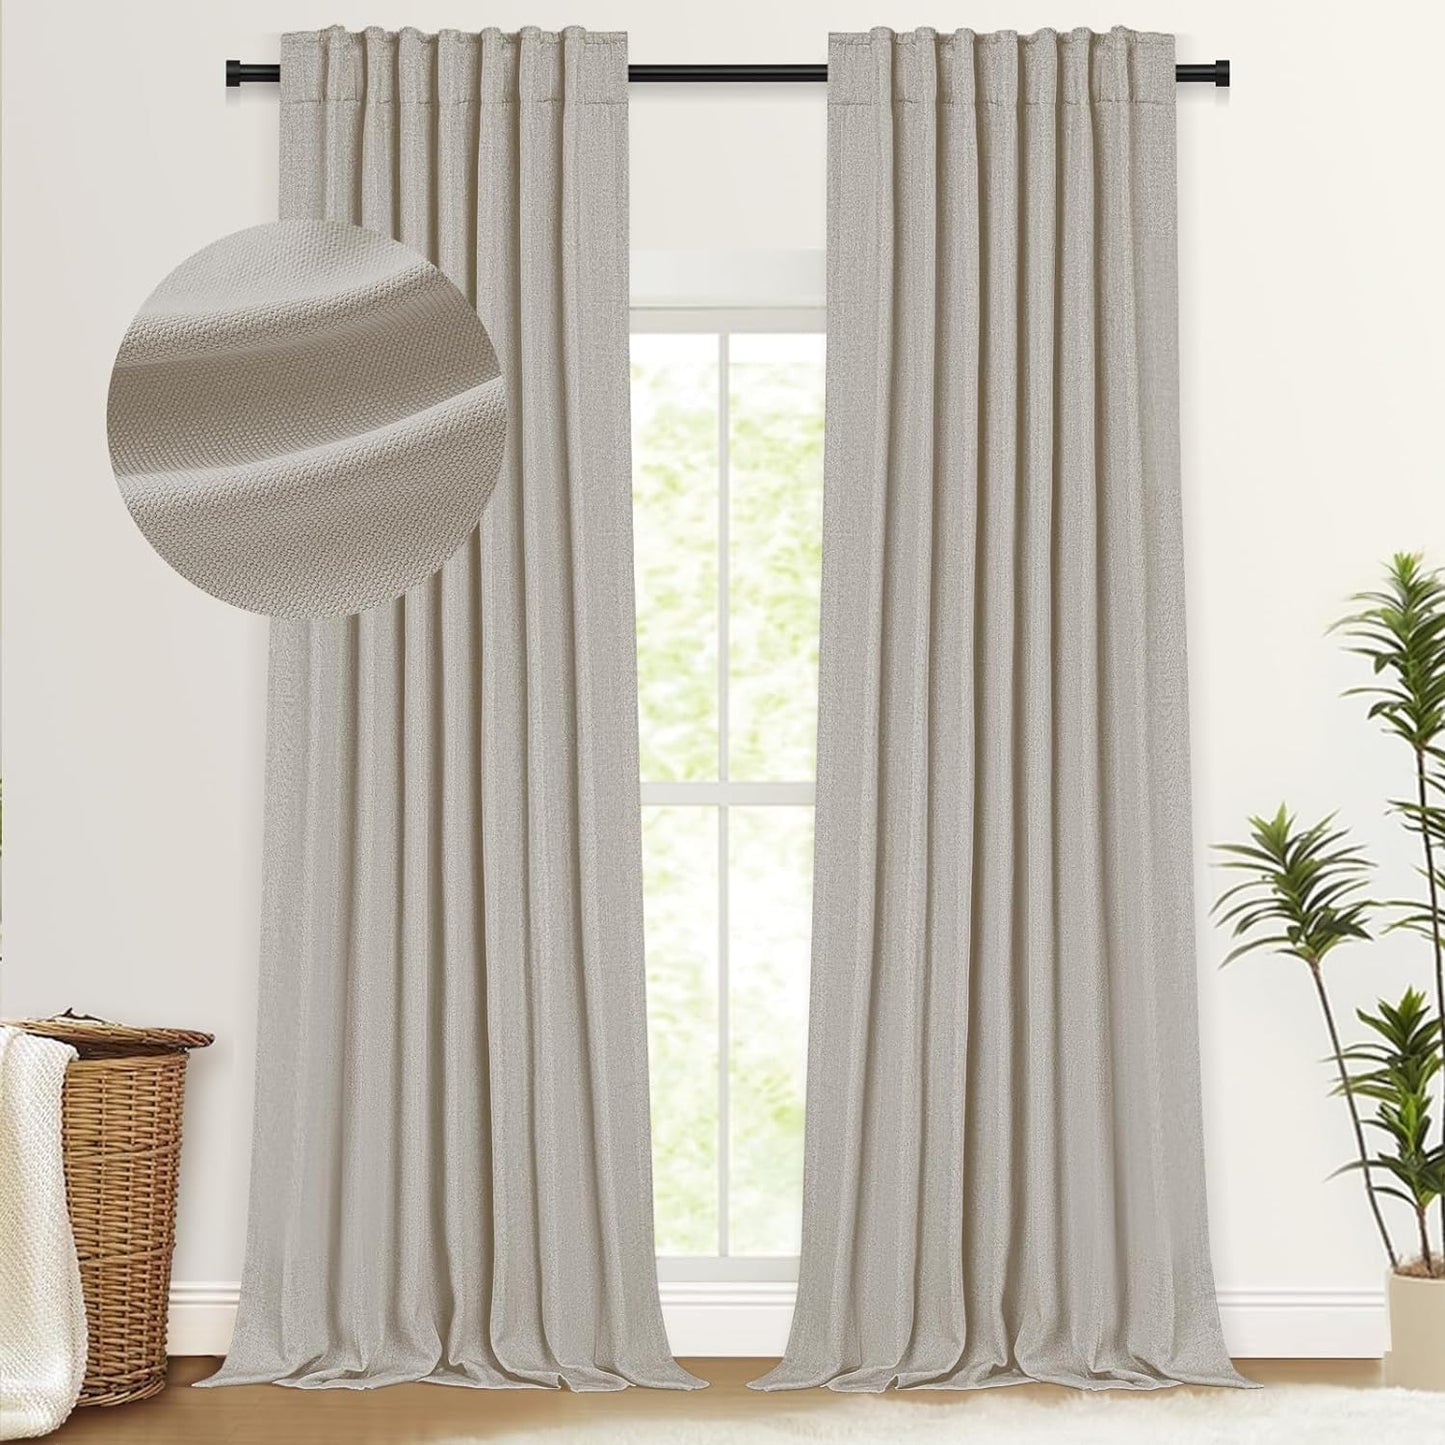 100% Blackout Shield Faux Linen Blackout Curtains for Bedroom 84 Inch Length 2 Panels Set, Cream Curtains with Back Tab/Rod Pocket, Thermal Insulated Drapes for Living Room, 50" W X 84" L, Cream  100% Blackout Shield Thatched Tan 50''W X 96''L 